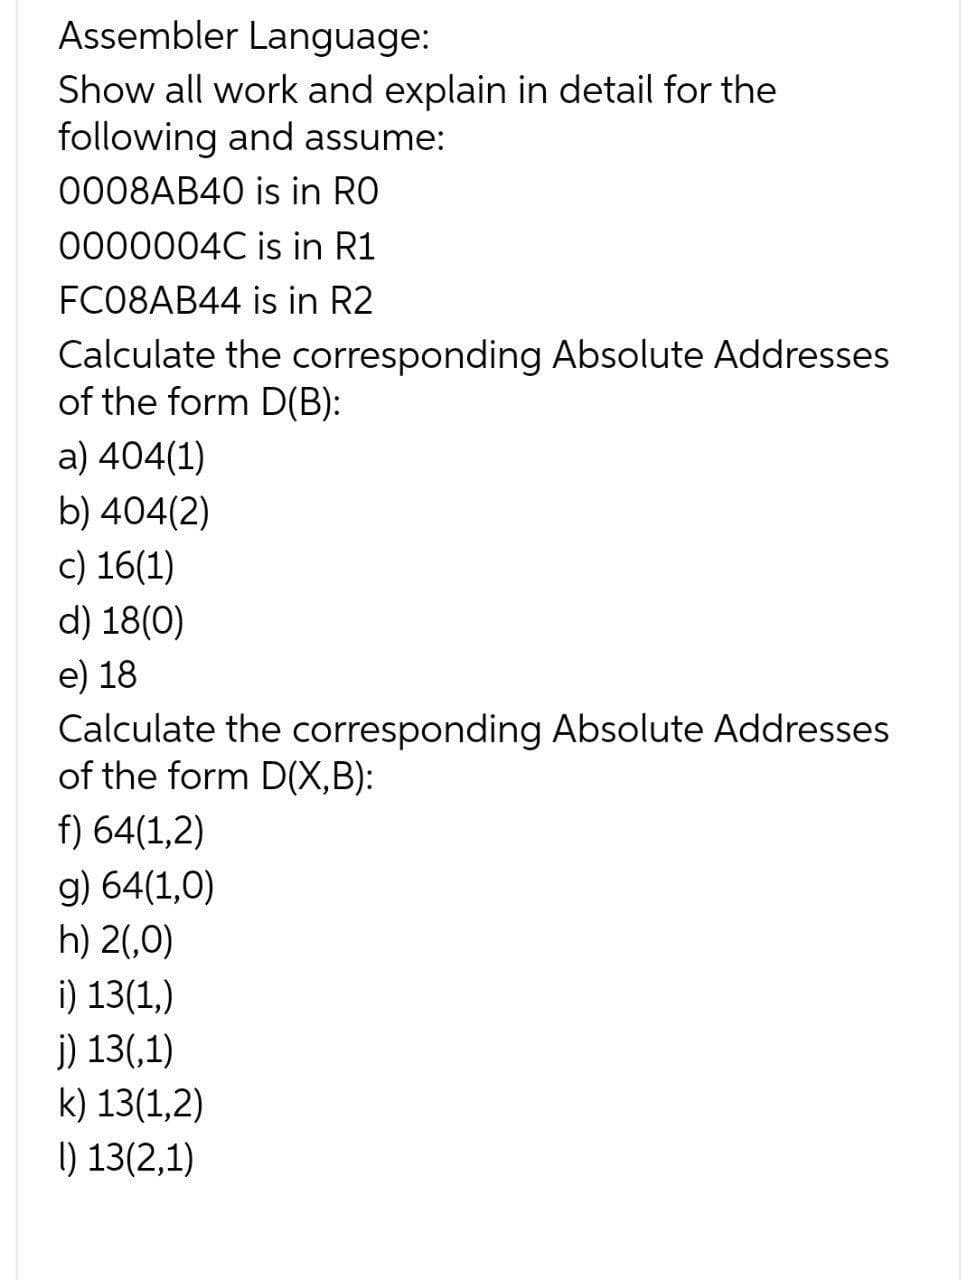 Assembler Language:
Show all work and explain in detail for the
following and assume:
0008AB40 is in RO
0000004C is in R1
FC08AB44 is in R2
Calculate the corresponding Absolute Addresses
of the form D(B):
a) 404(1)
b) 404(2)
c) 16(1)
d) 18(0)
e) 18
Calculate the corresponding Absolute Addresses
of the form D(X,B):
f) 64(1,2)
g) 64(1,0)
h) 2(,0)
i) 13(1,)
j) 13(,1)
k) 13(1,2)
I) 13(2,1)
